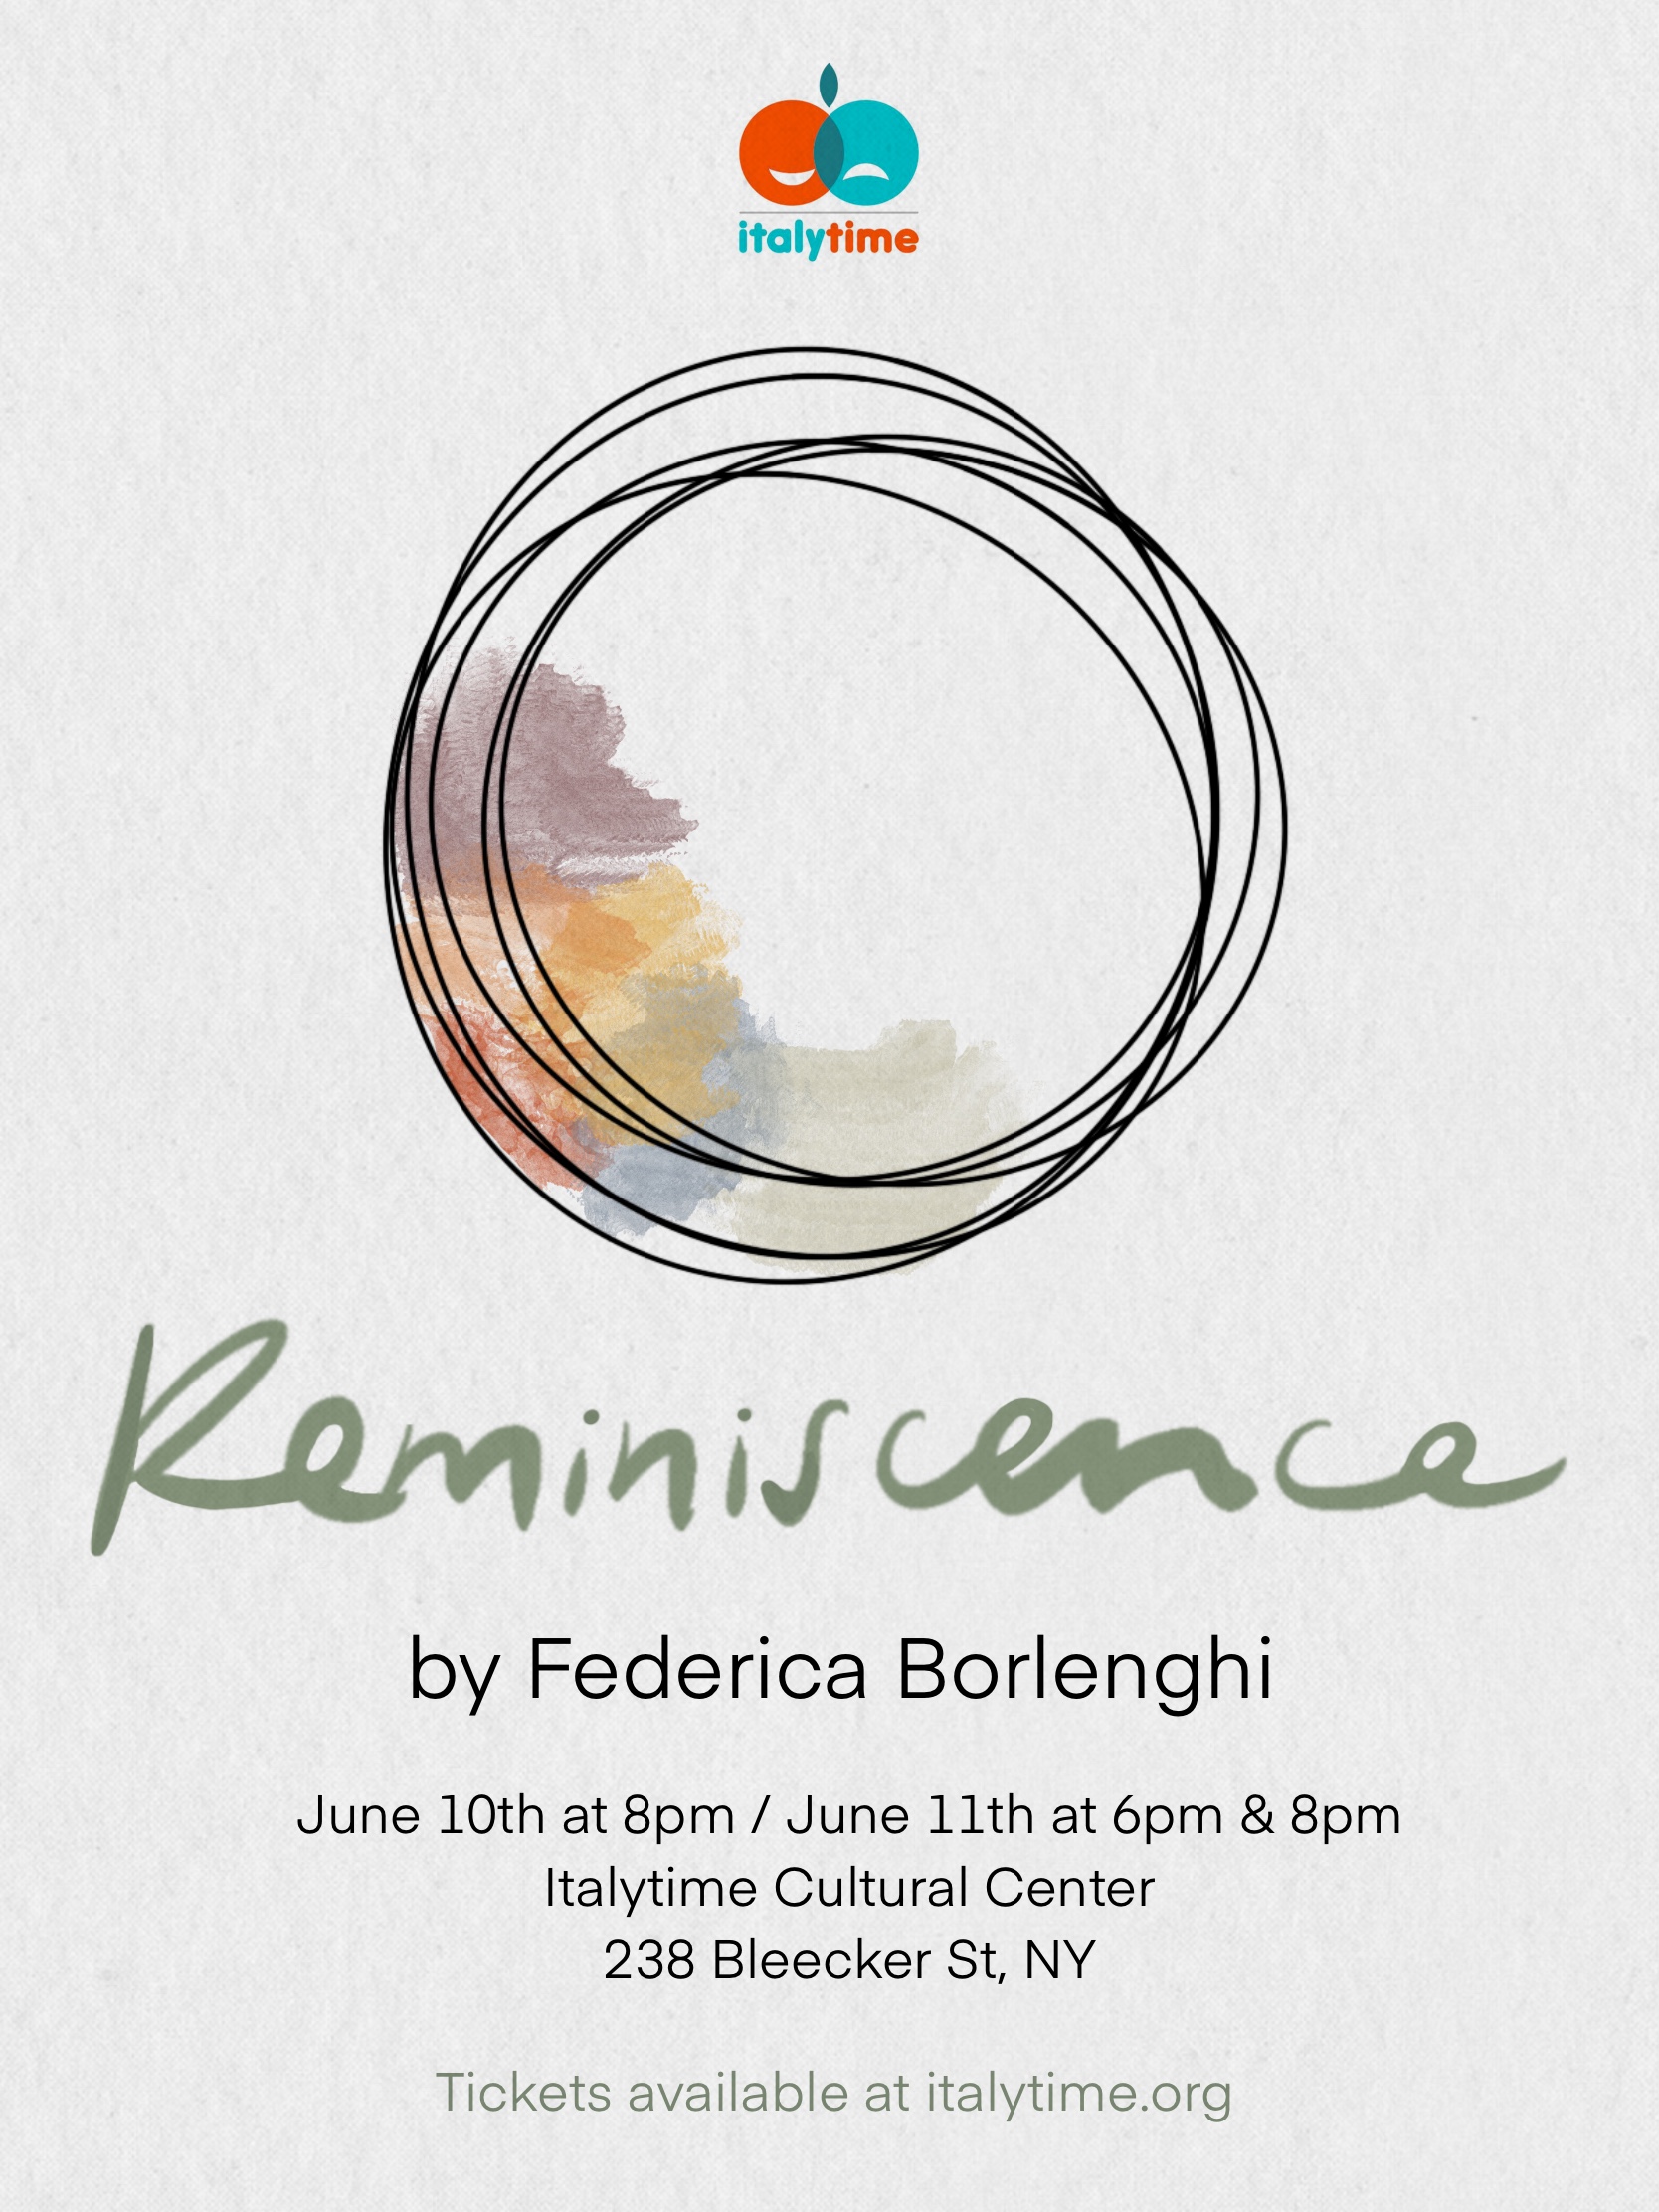 REMINISCENCE, A Multicultural Performance Announced At The Italytime Cultural Center 